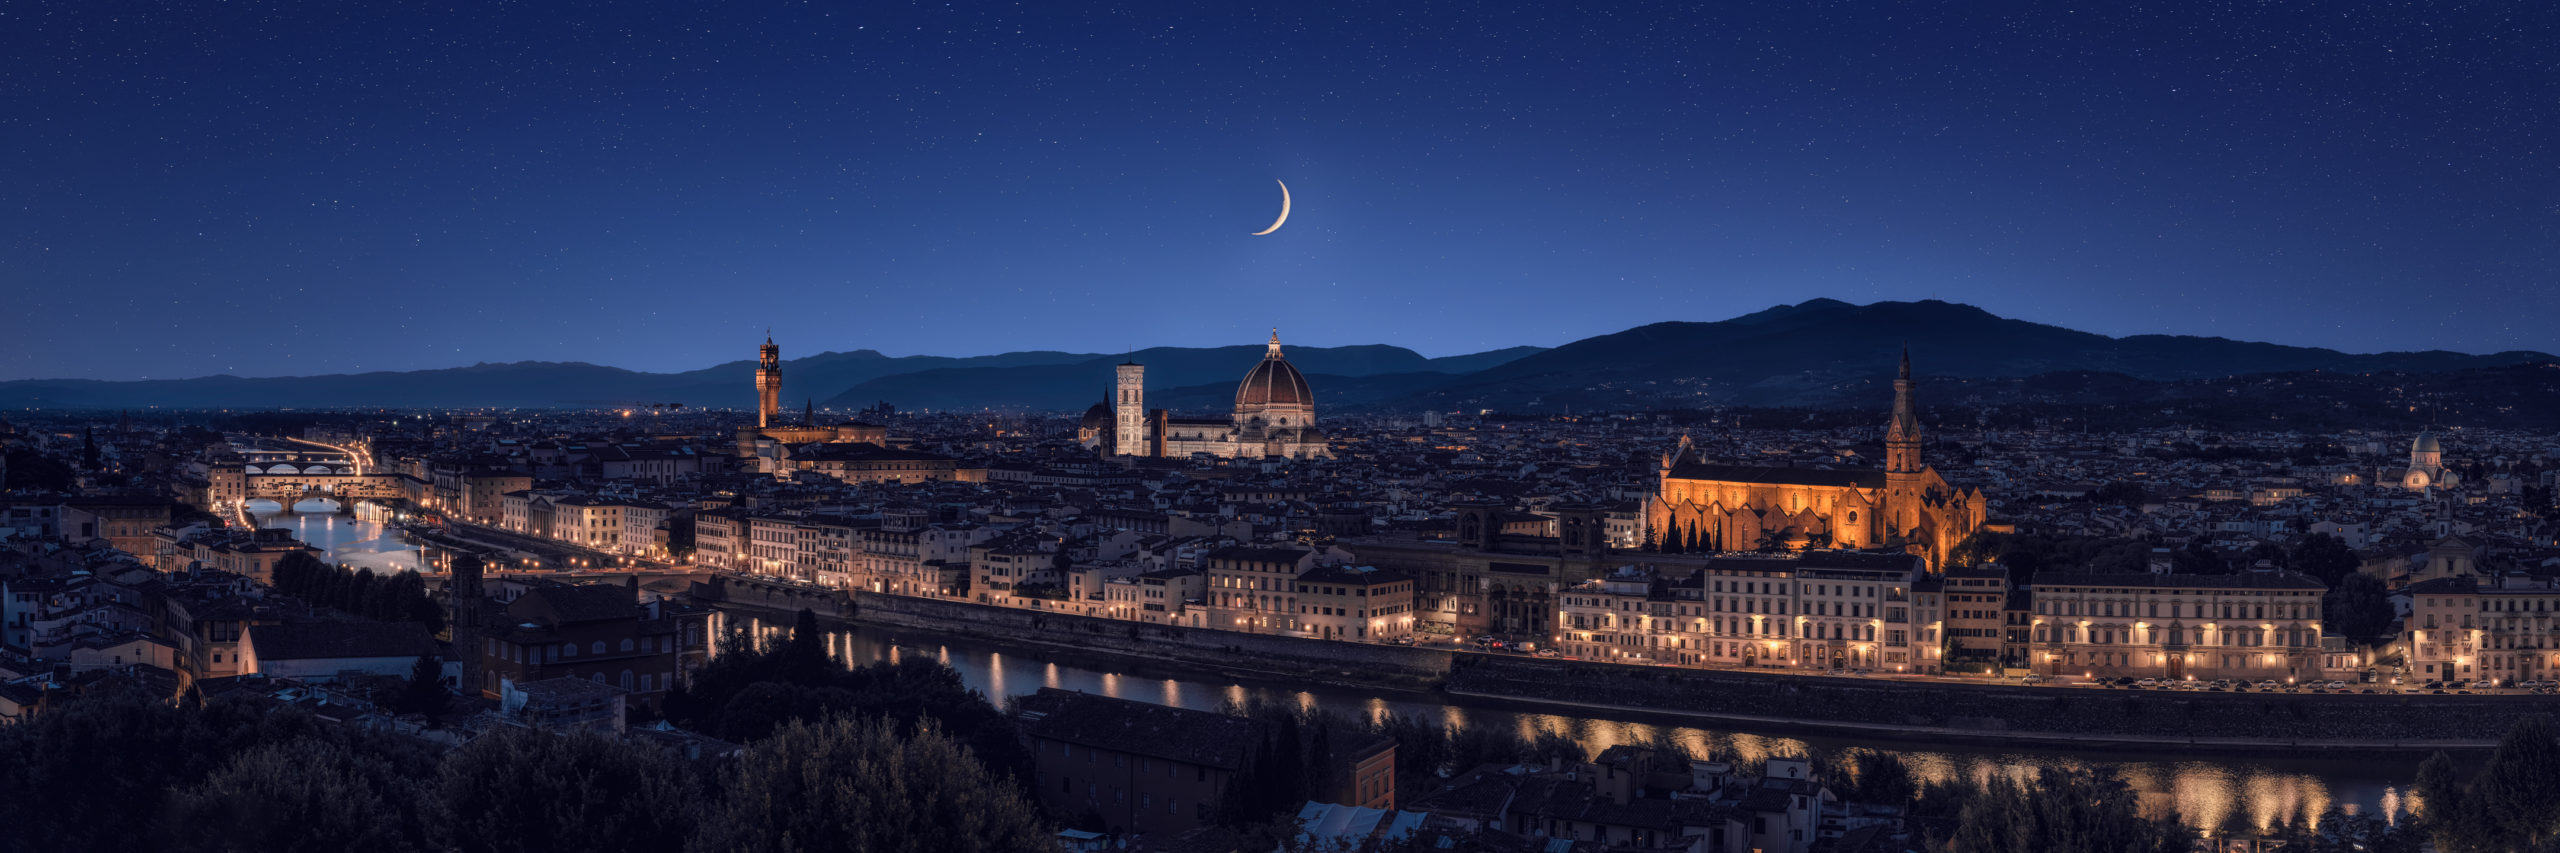 FLORENCIA-PANORAMIC-PIAZZALE-MICHELANGELO